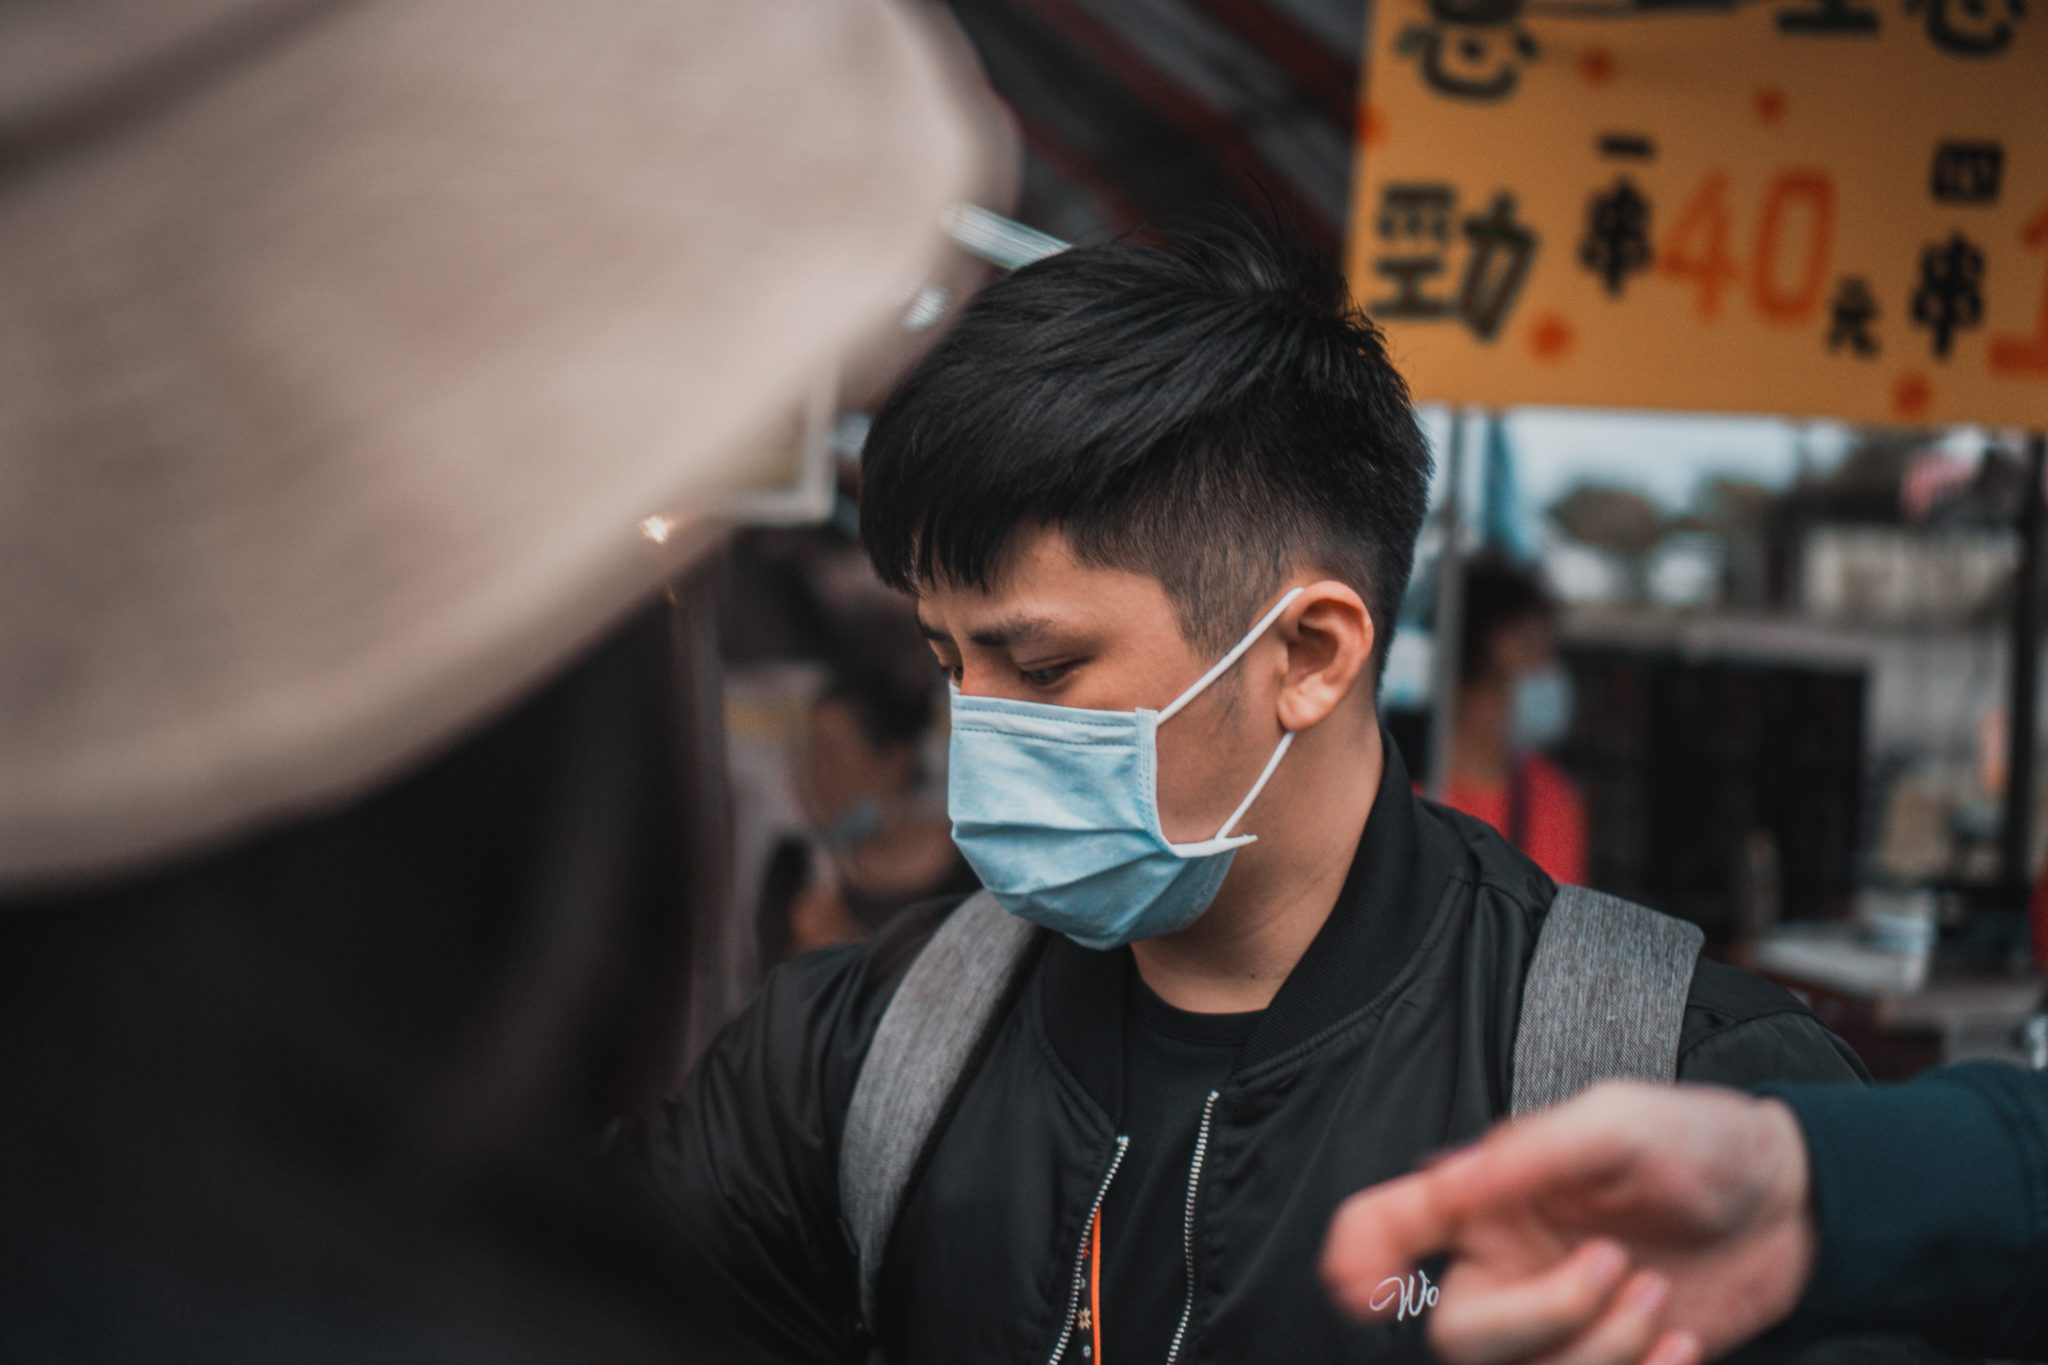 Taiwanese Not Satisfied With Their Government’s Handling of the Pandemic, Survey Reveals